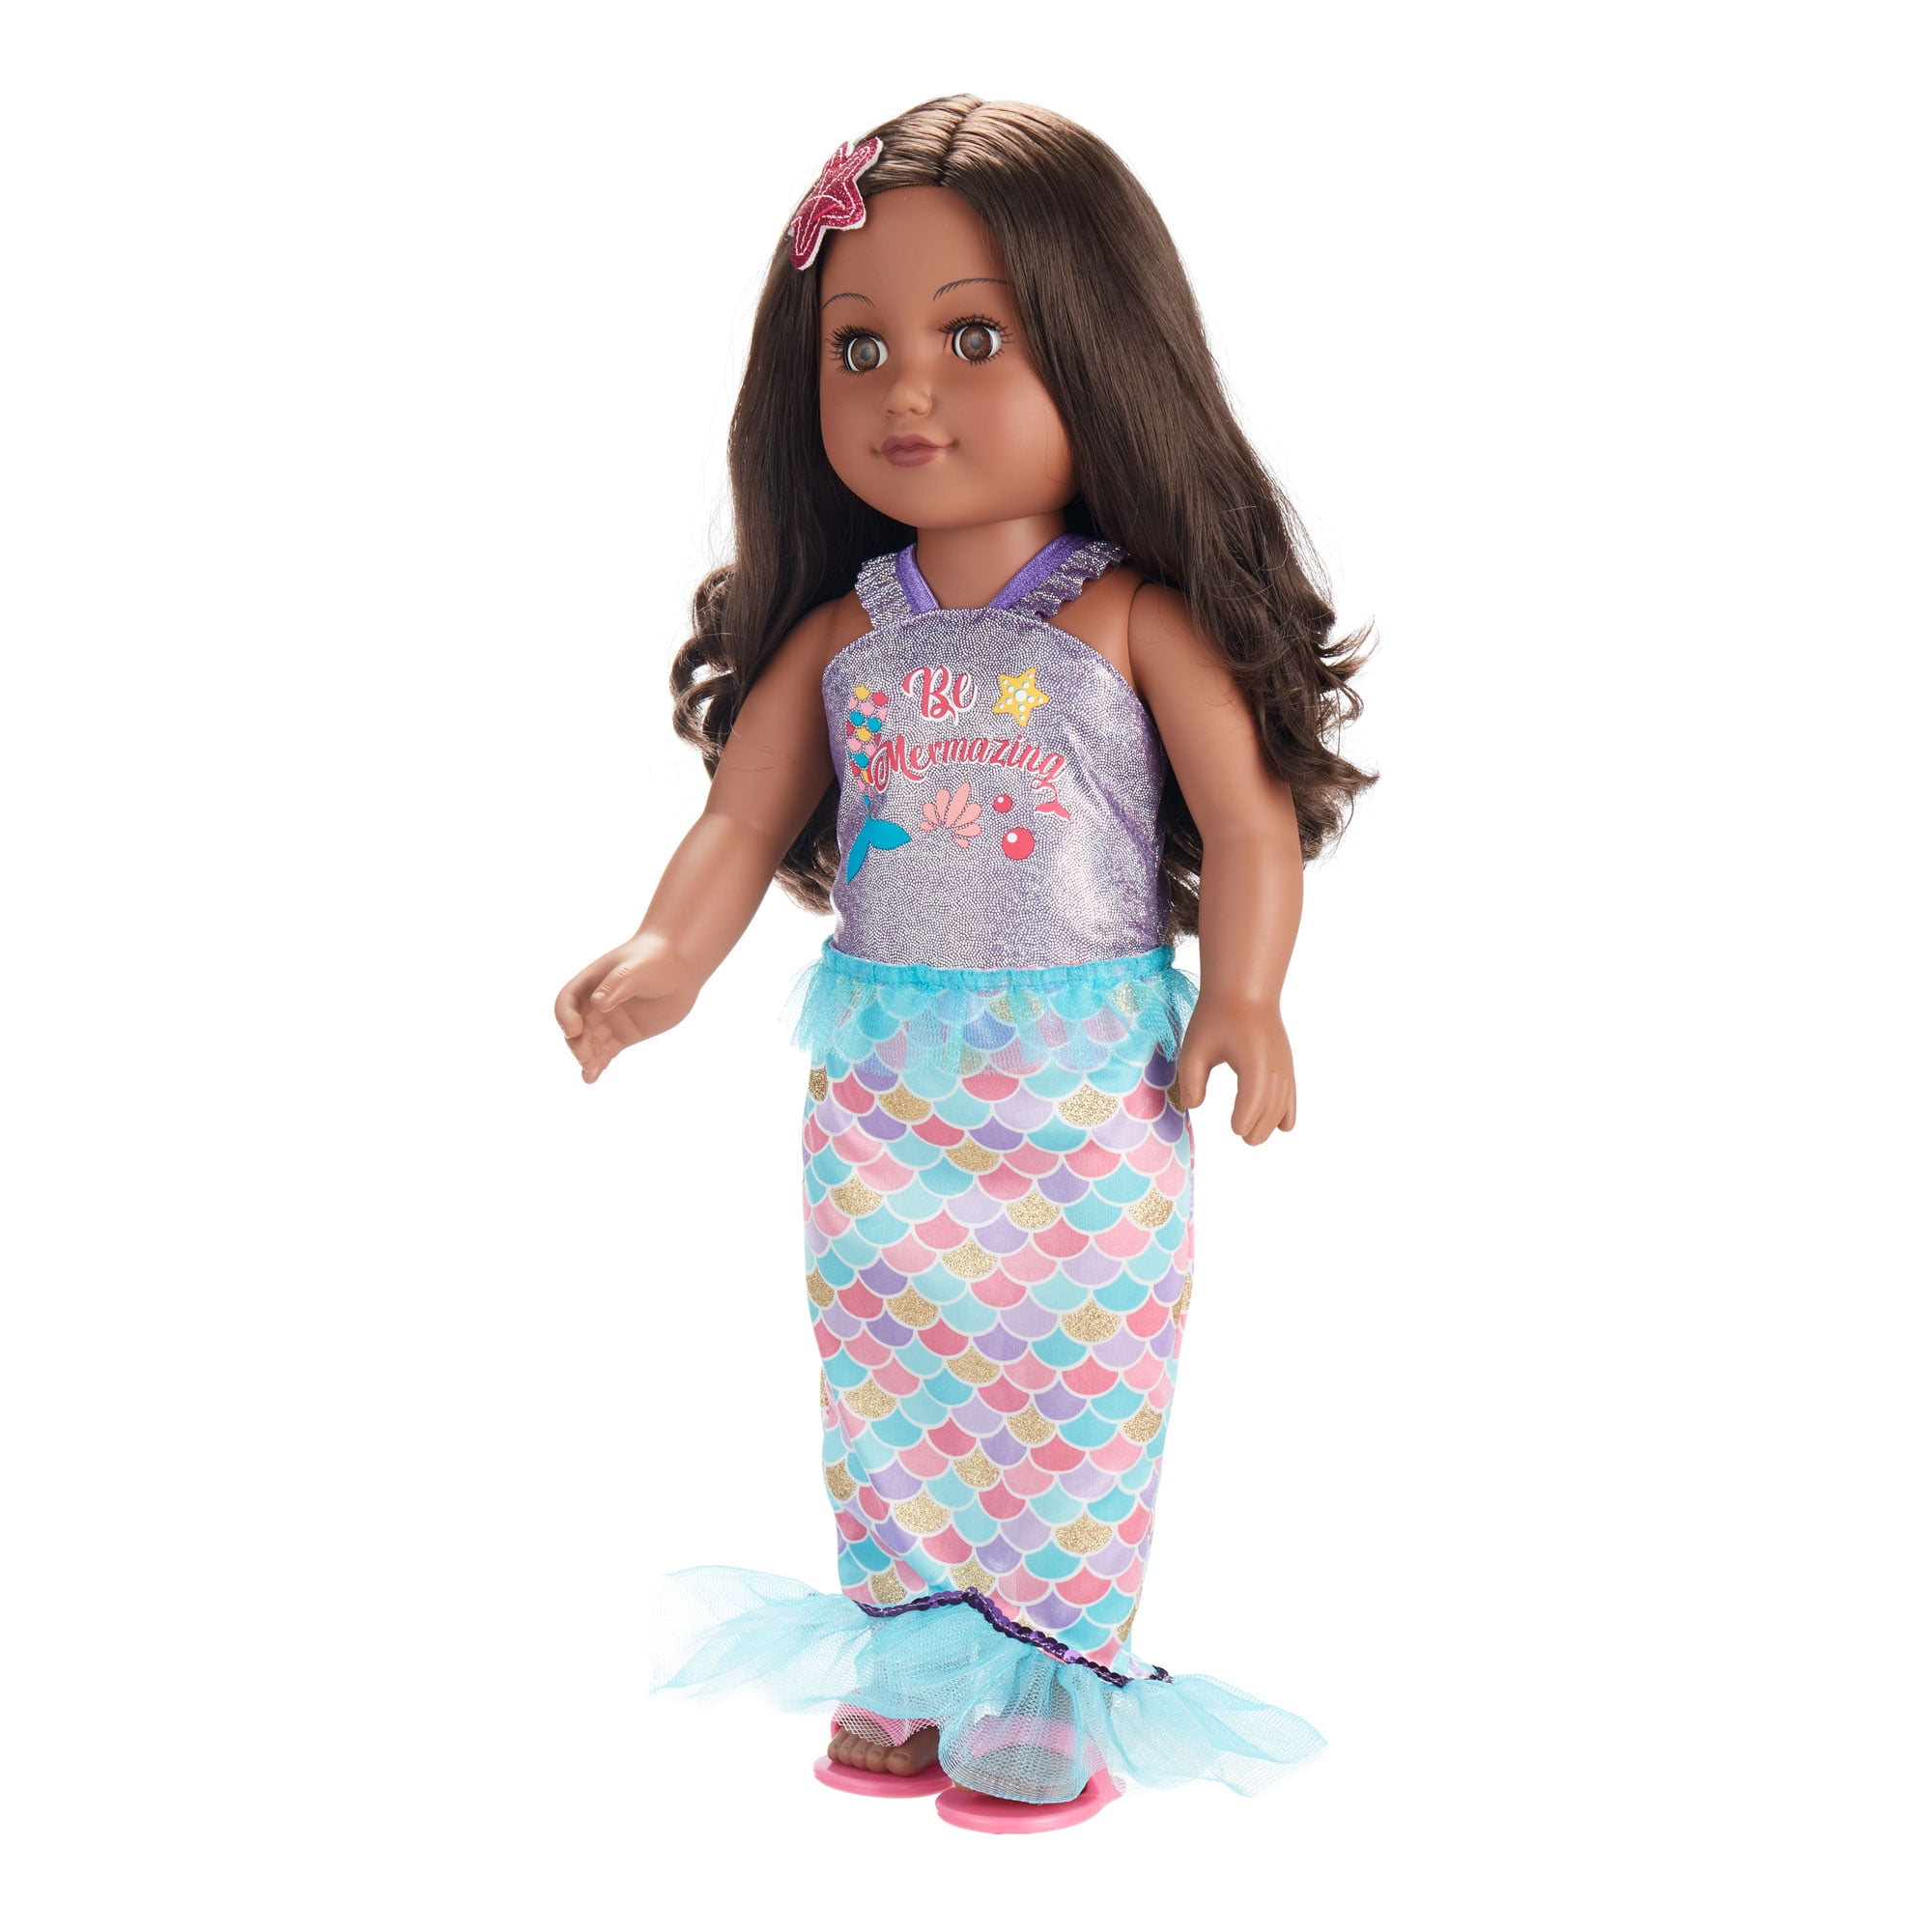 My Life as Foreign Language Tutor African American 18 Inch Posable Doll for sale online